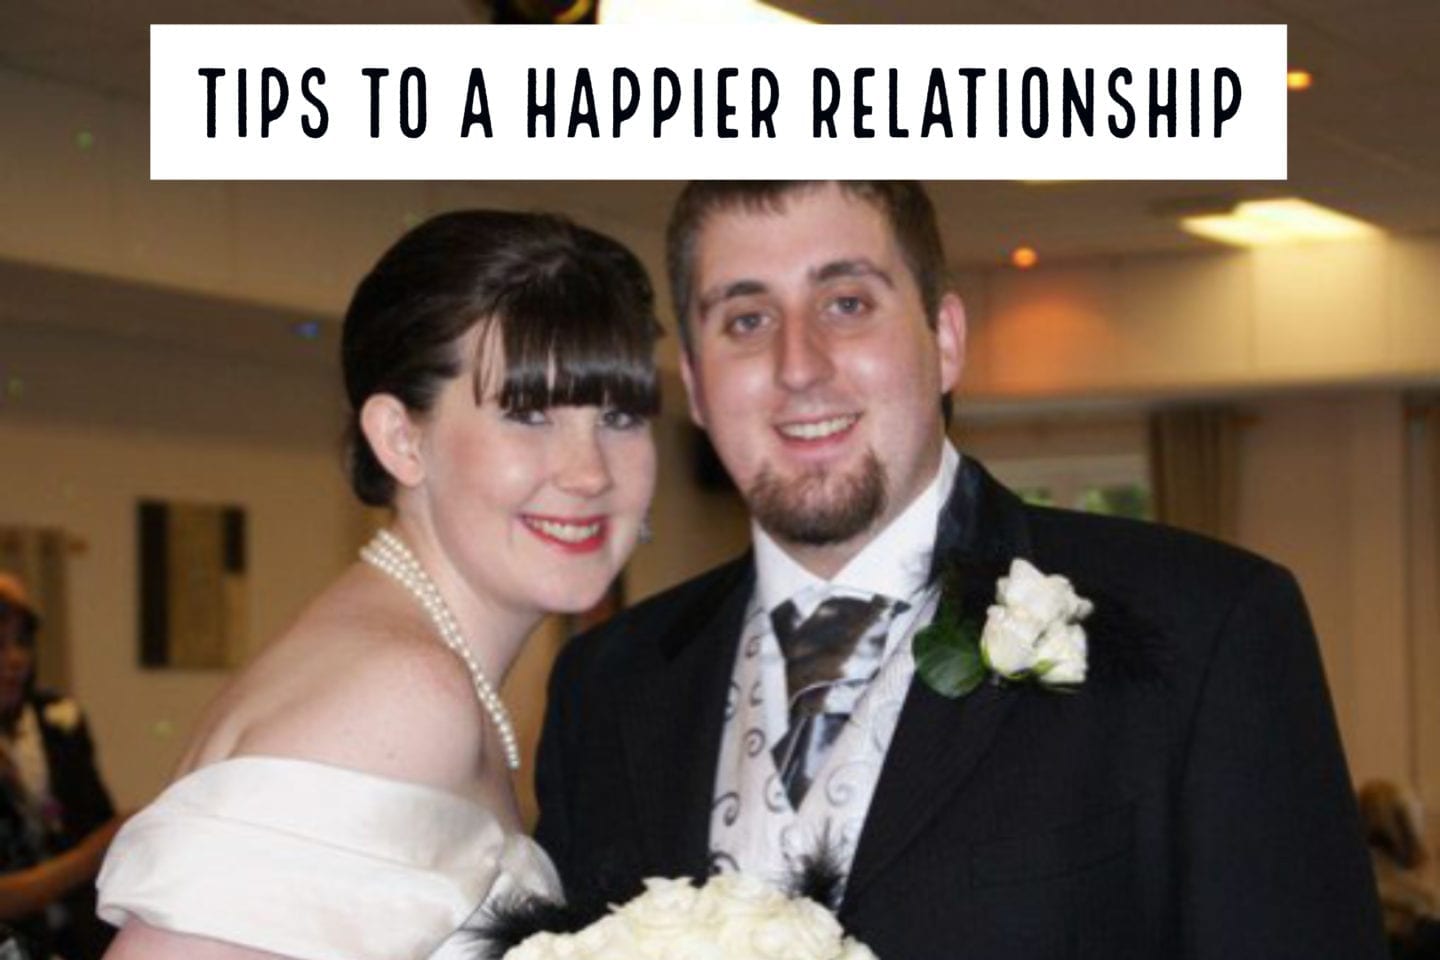 Relationships // Tips To A Happier Relationship – On Our 8th Wedding Anniversary!